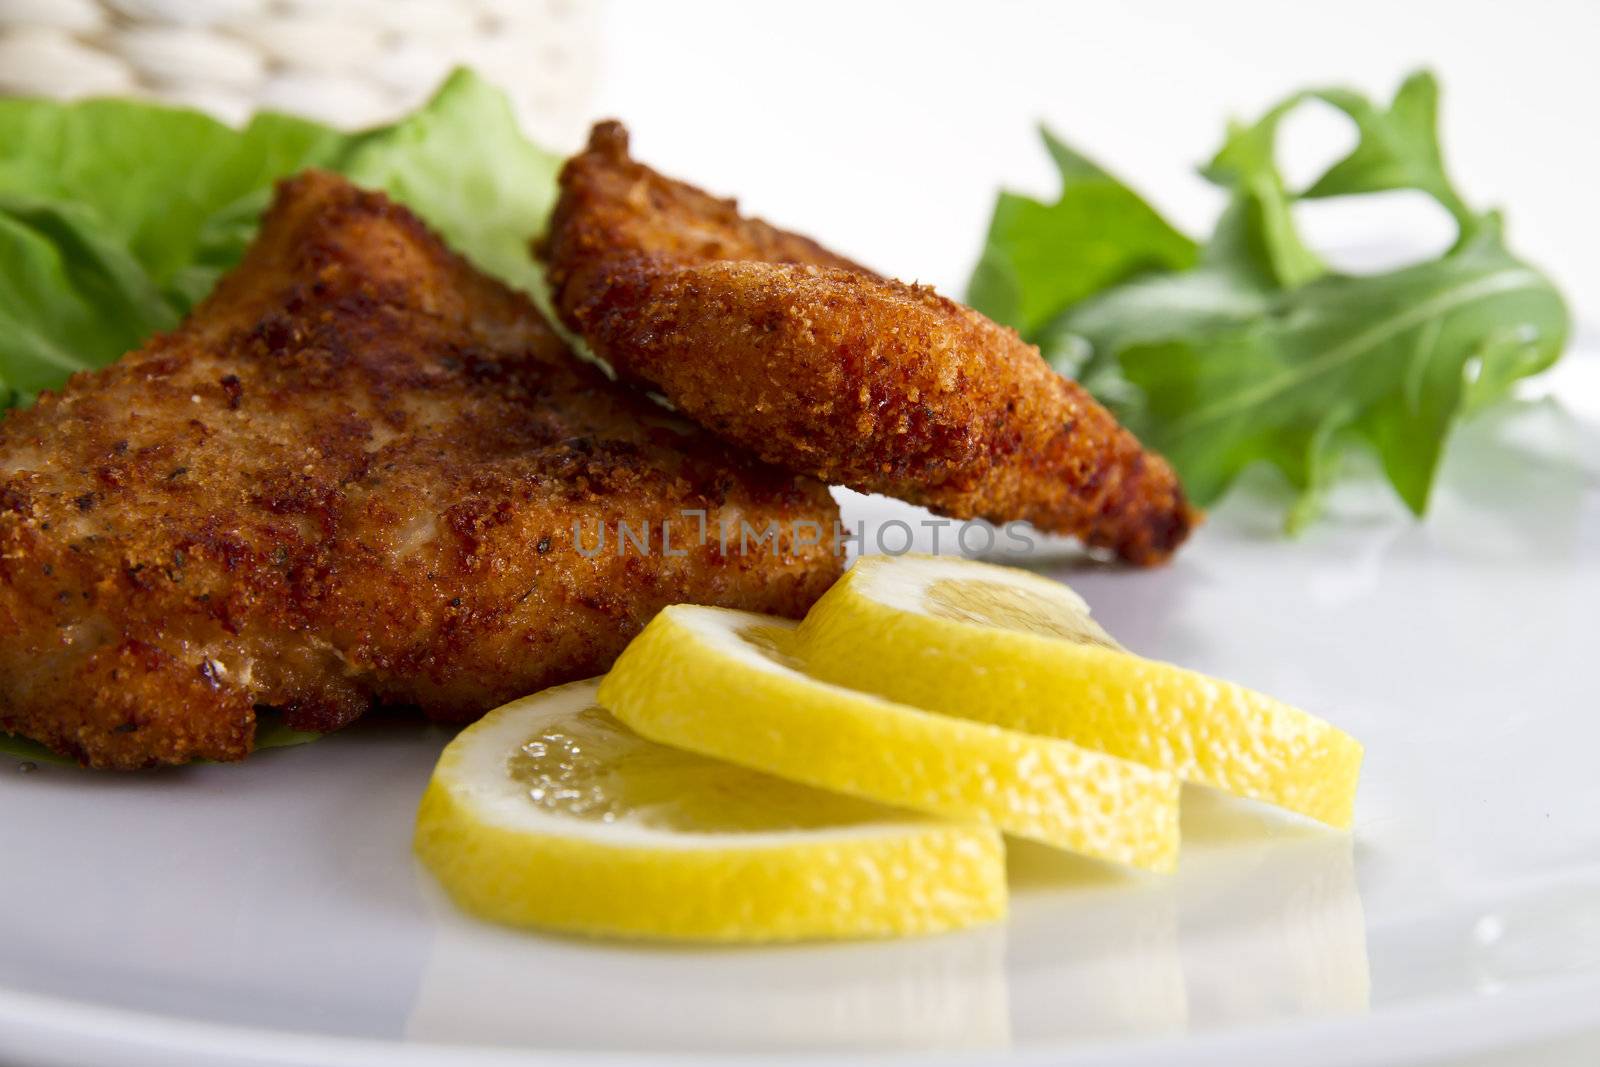 Breaded meat with lemon and salad by caldix